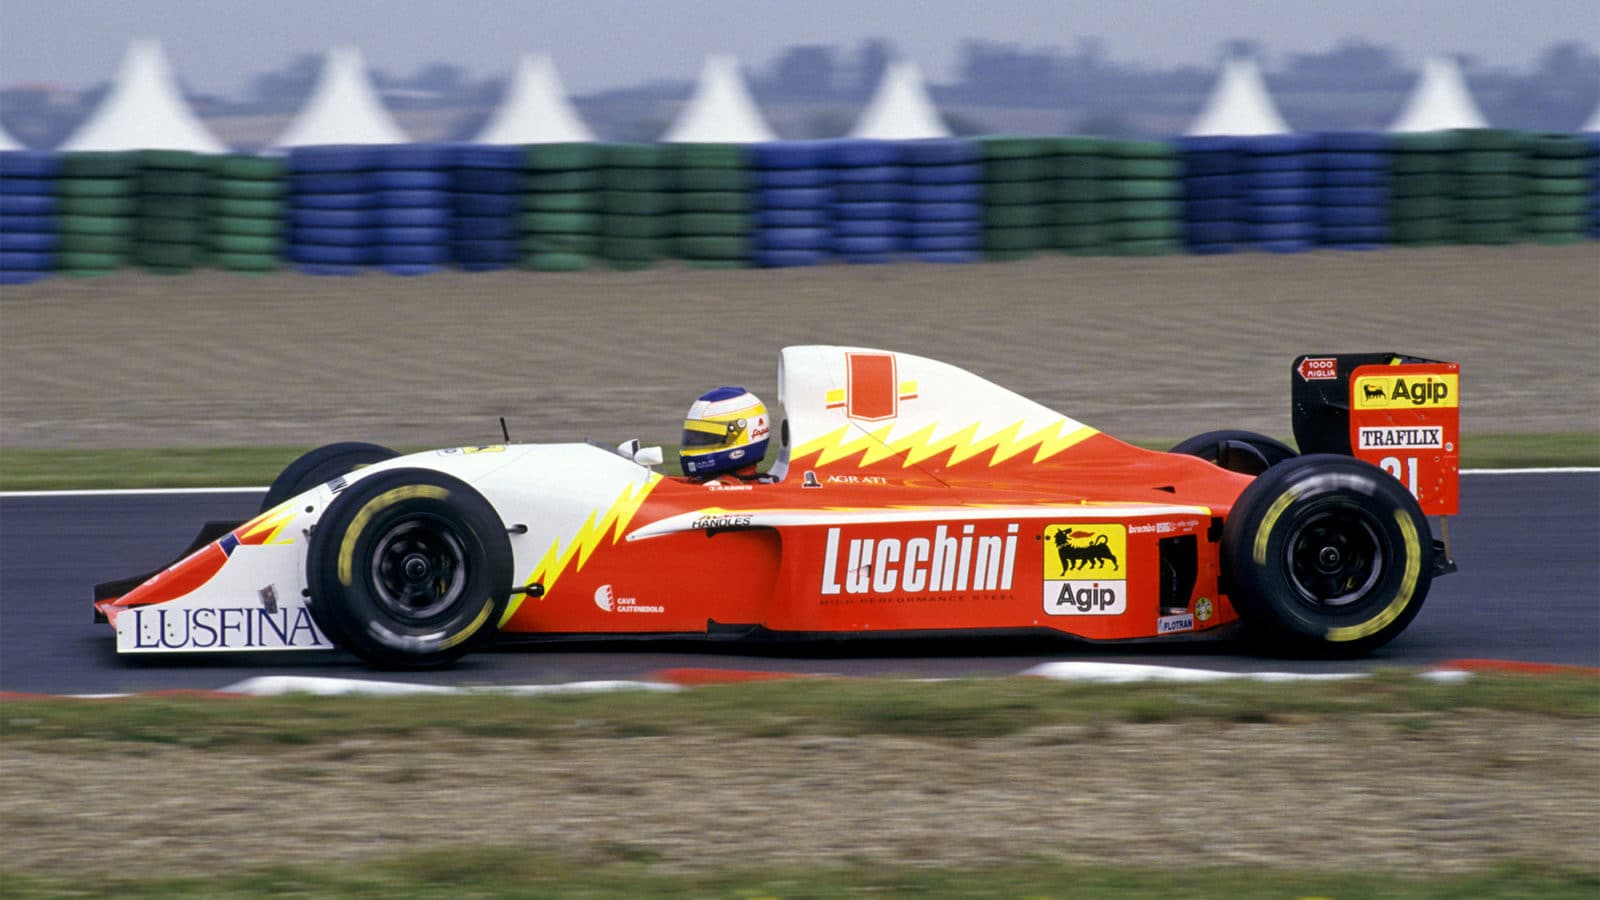 1993 Michele Alboreto driving a Lola T93/30 at Magny-Cours, French GP. (Photo by: GP Library/Universal Images Group via Getty Images)